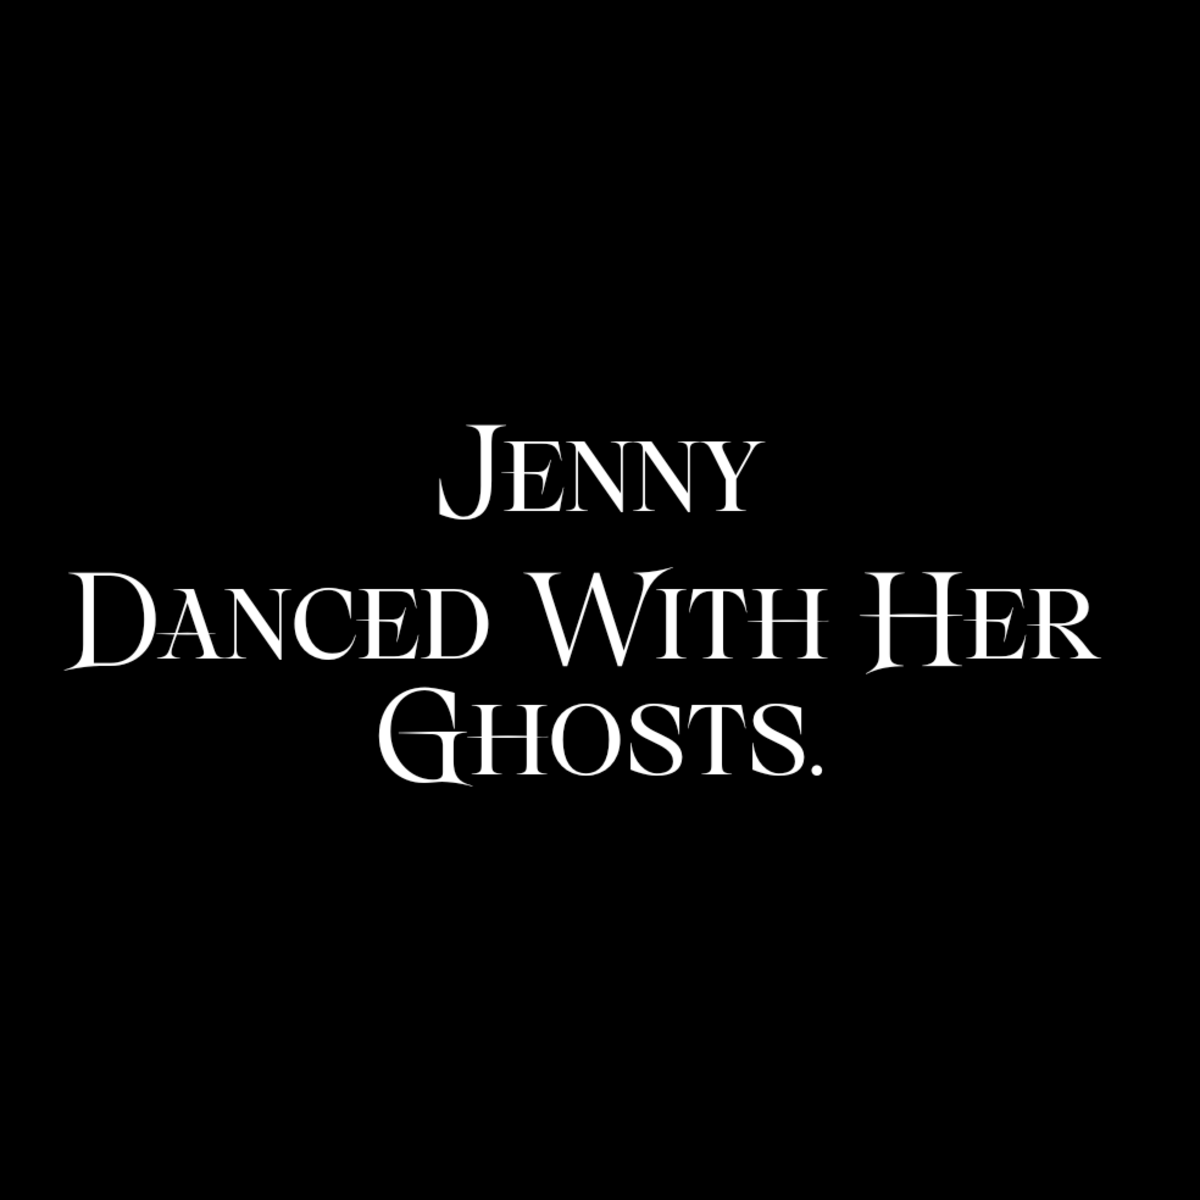 Jenny Danced With Her Ghosts.